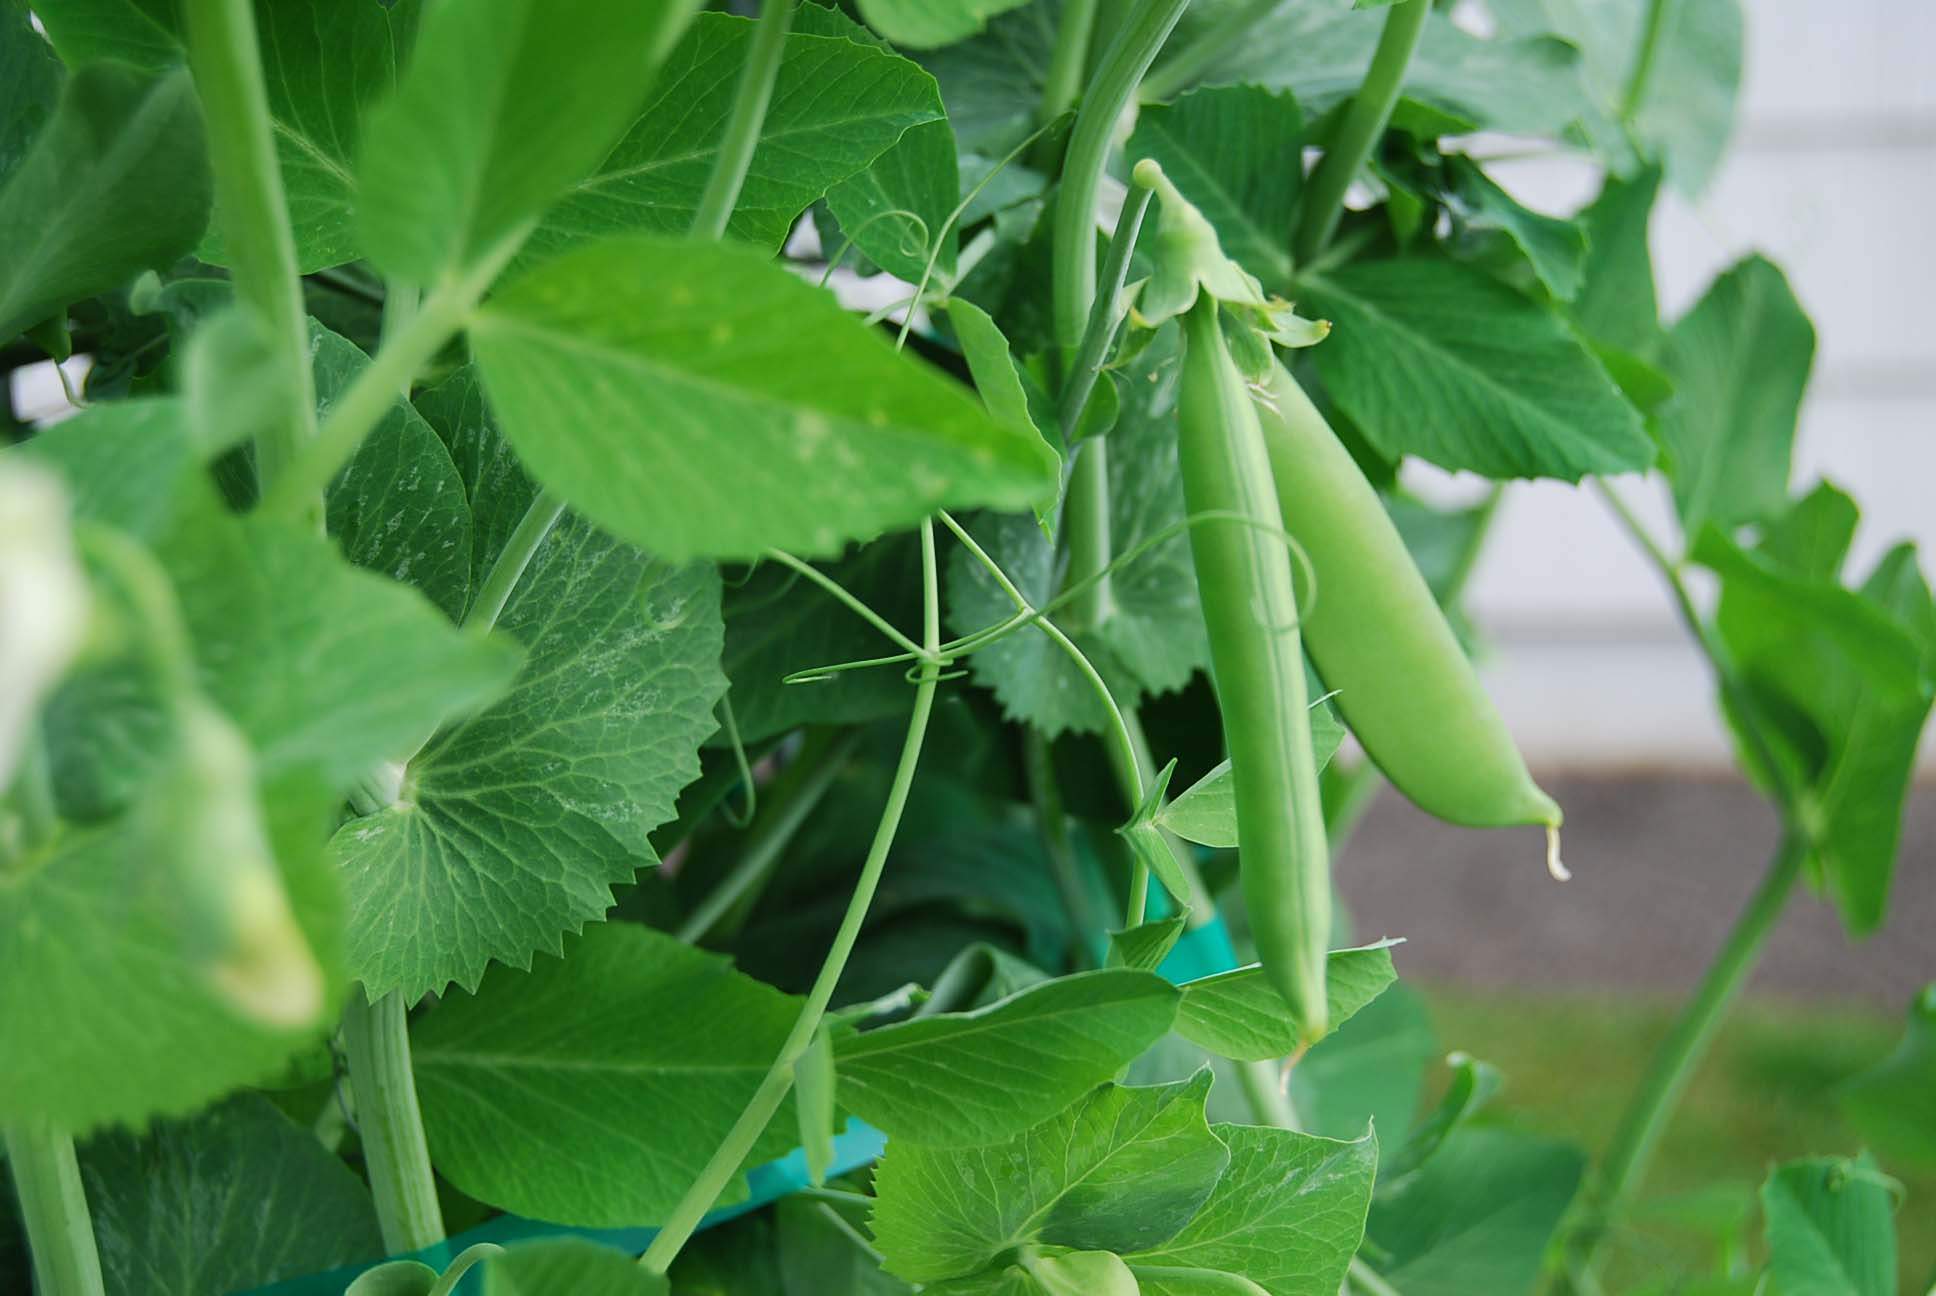 Sugar Snap Peas, How to Prepare What You Grow